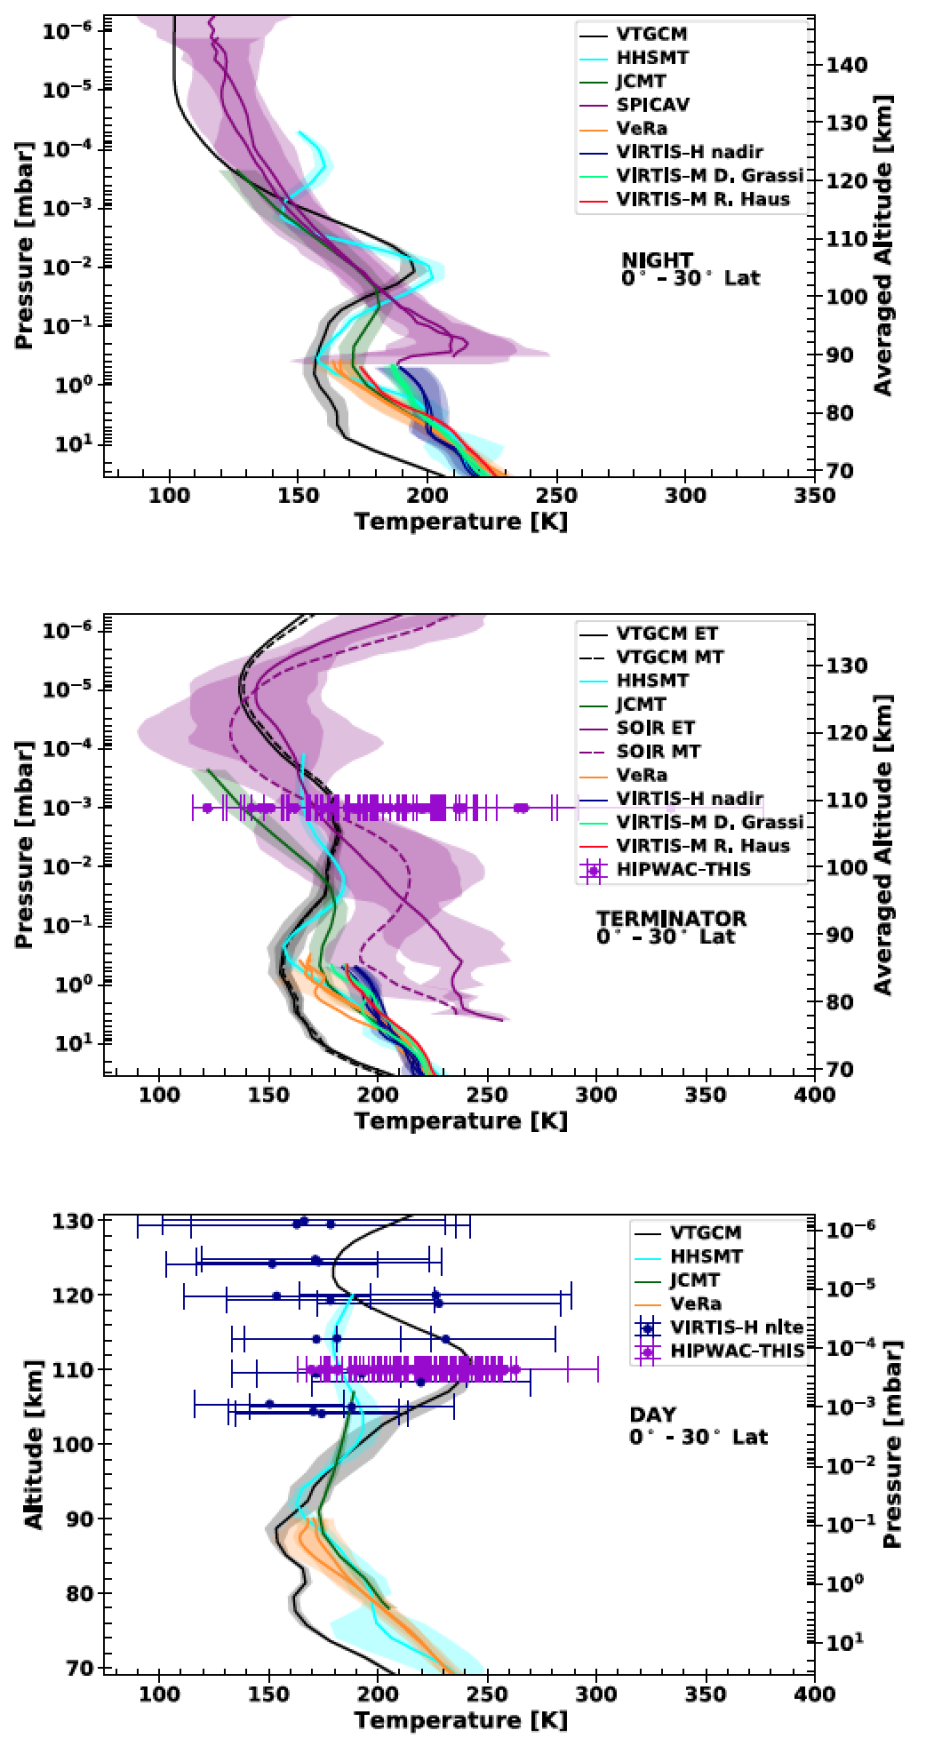 Combined temperature profiles from the Venus Thermosphere General Circulation Model (VTGCM) and observations near the equator (Lat = 0-30 N+S)